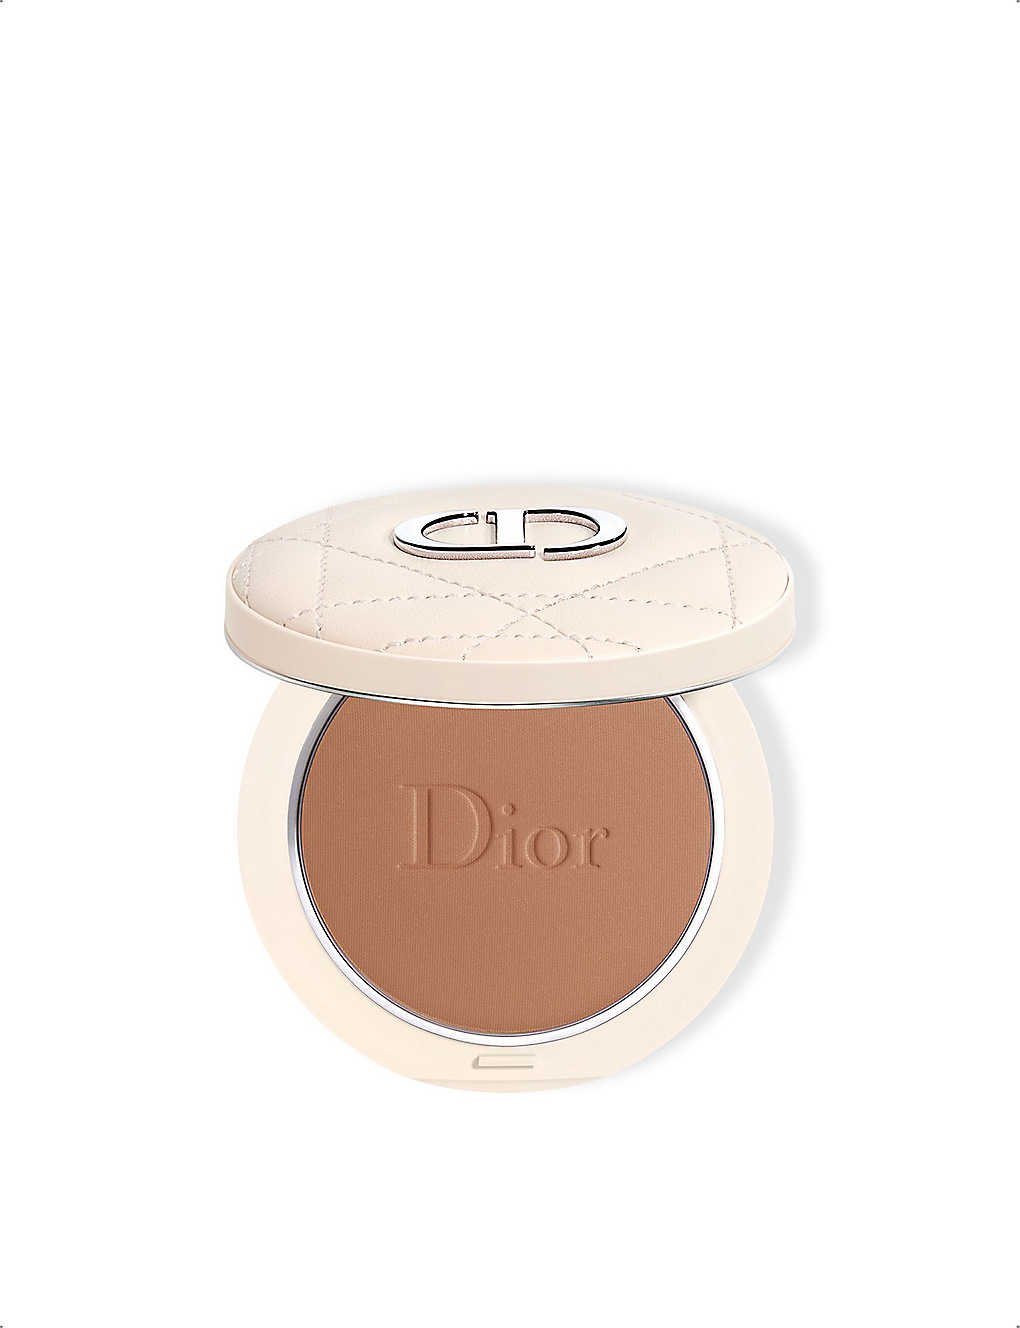 Dior Forever Natural Bronze Powder 9g In 006